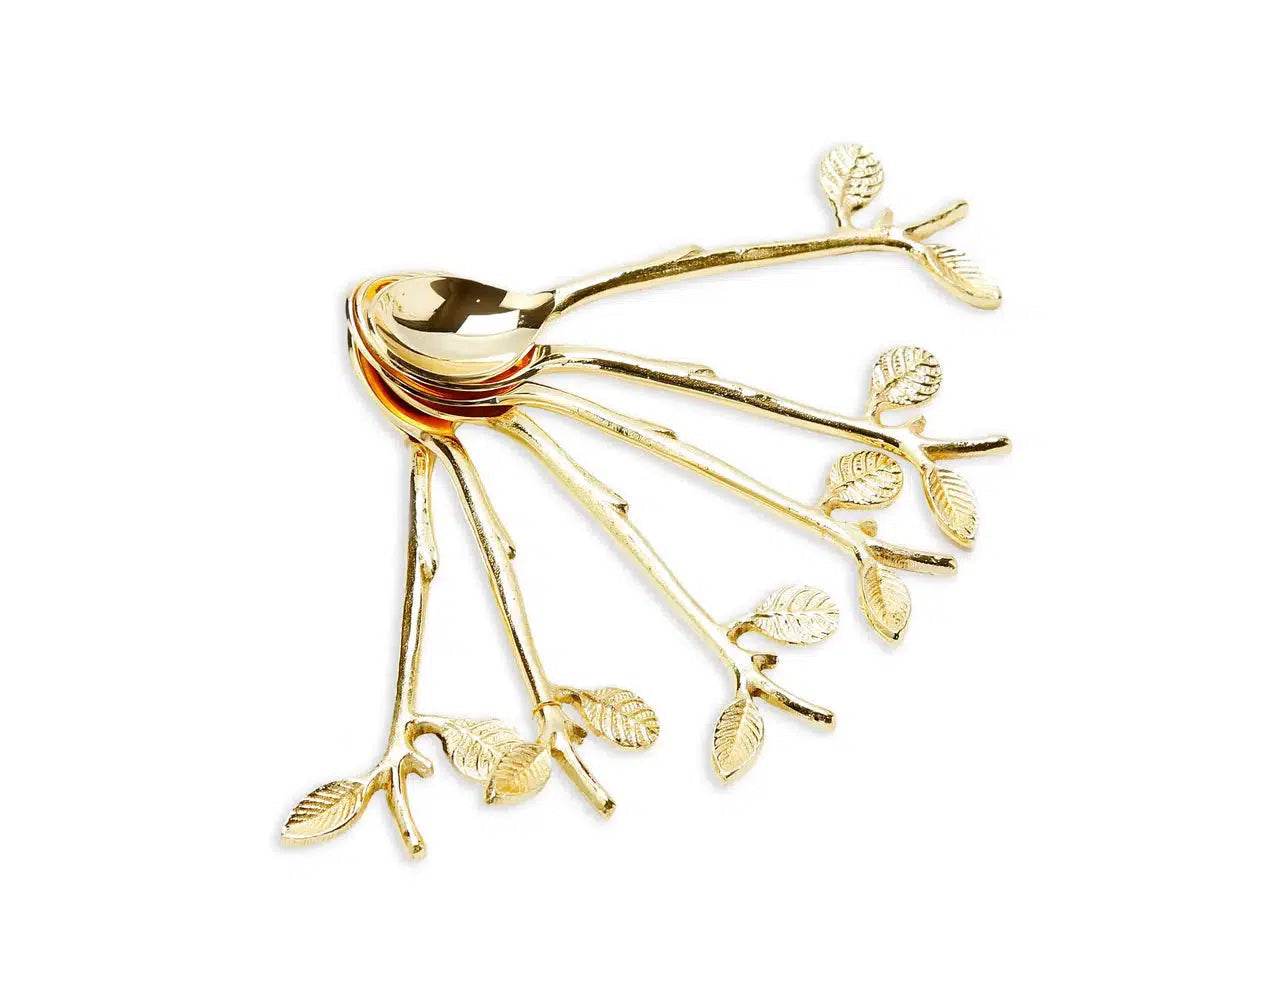 Gold Swan Dessert Spoon Holder with 6 Spoons Cutlery High Class Touch - Home Decor 